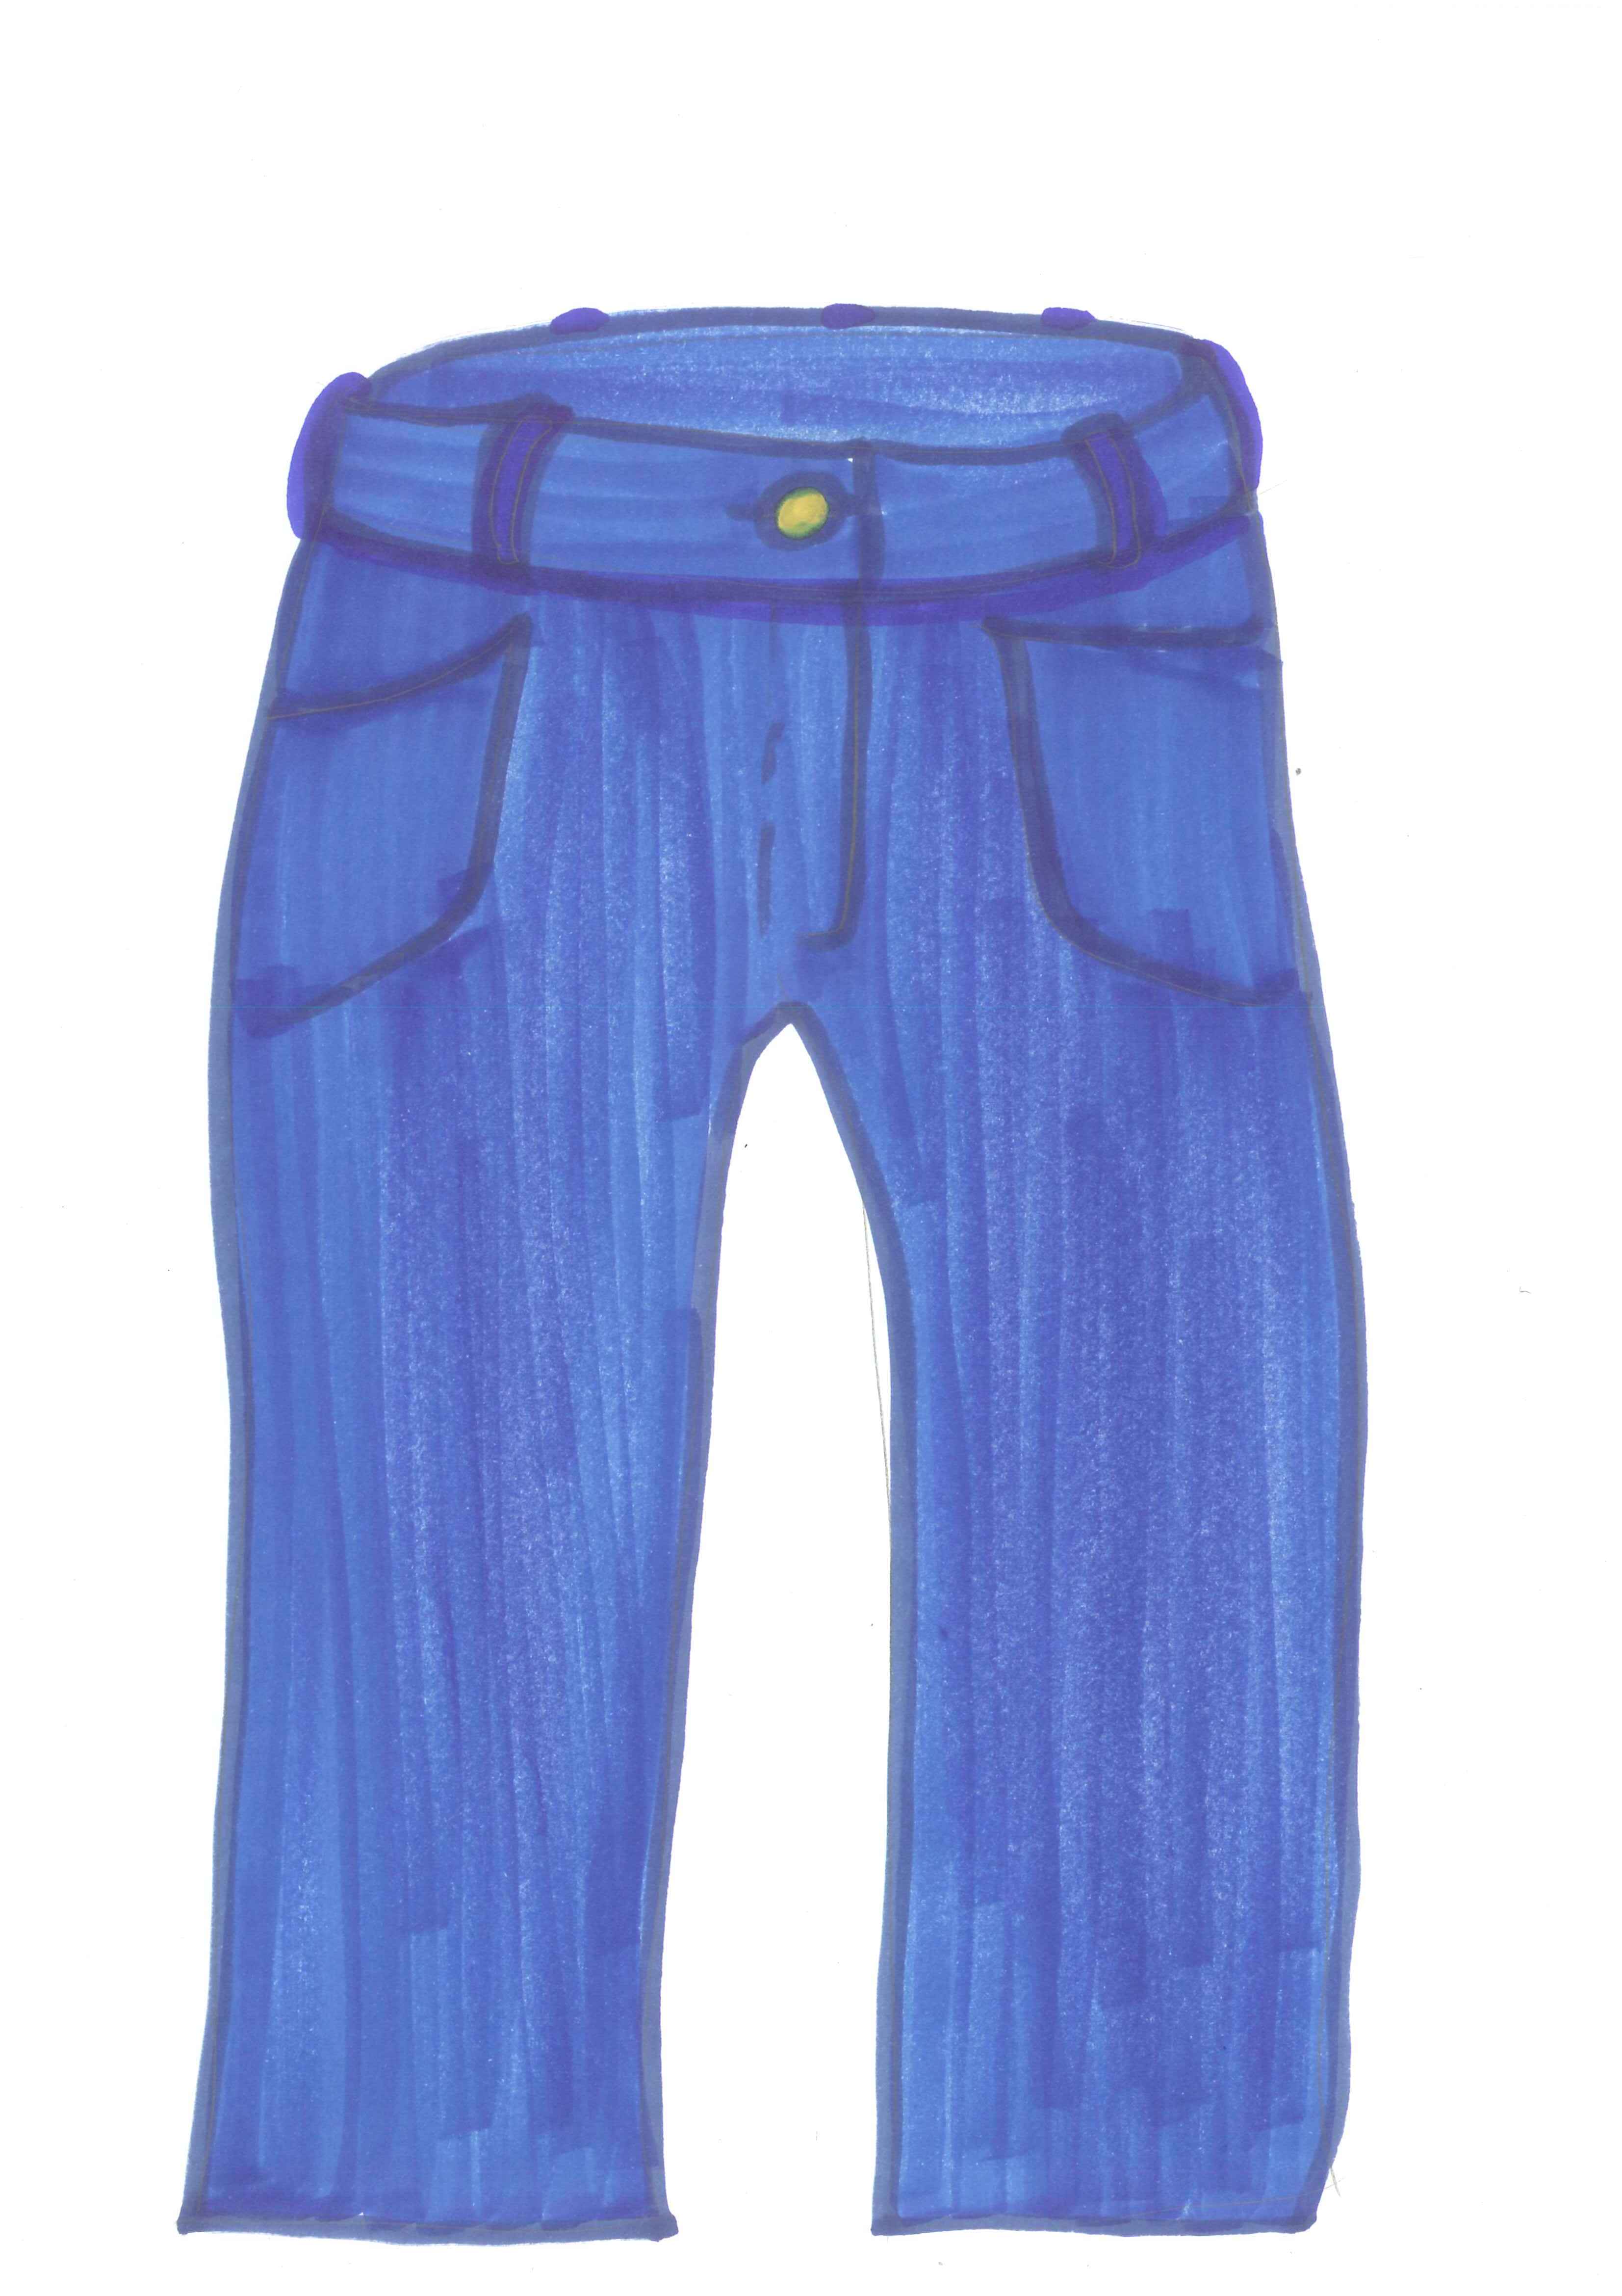 clipart picture of jeans - photo #34